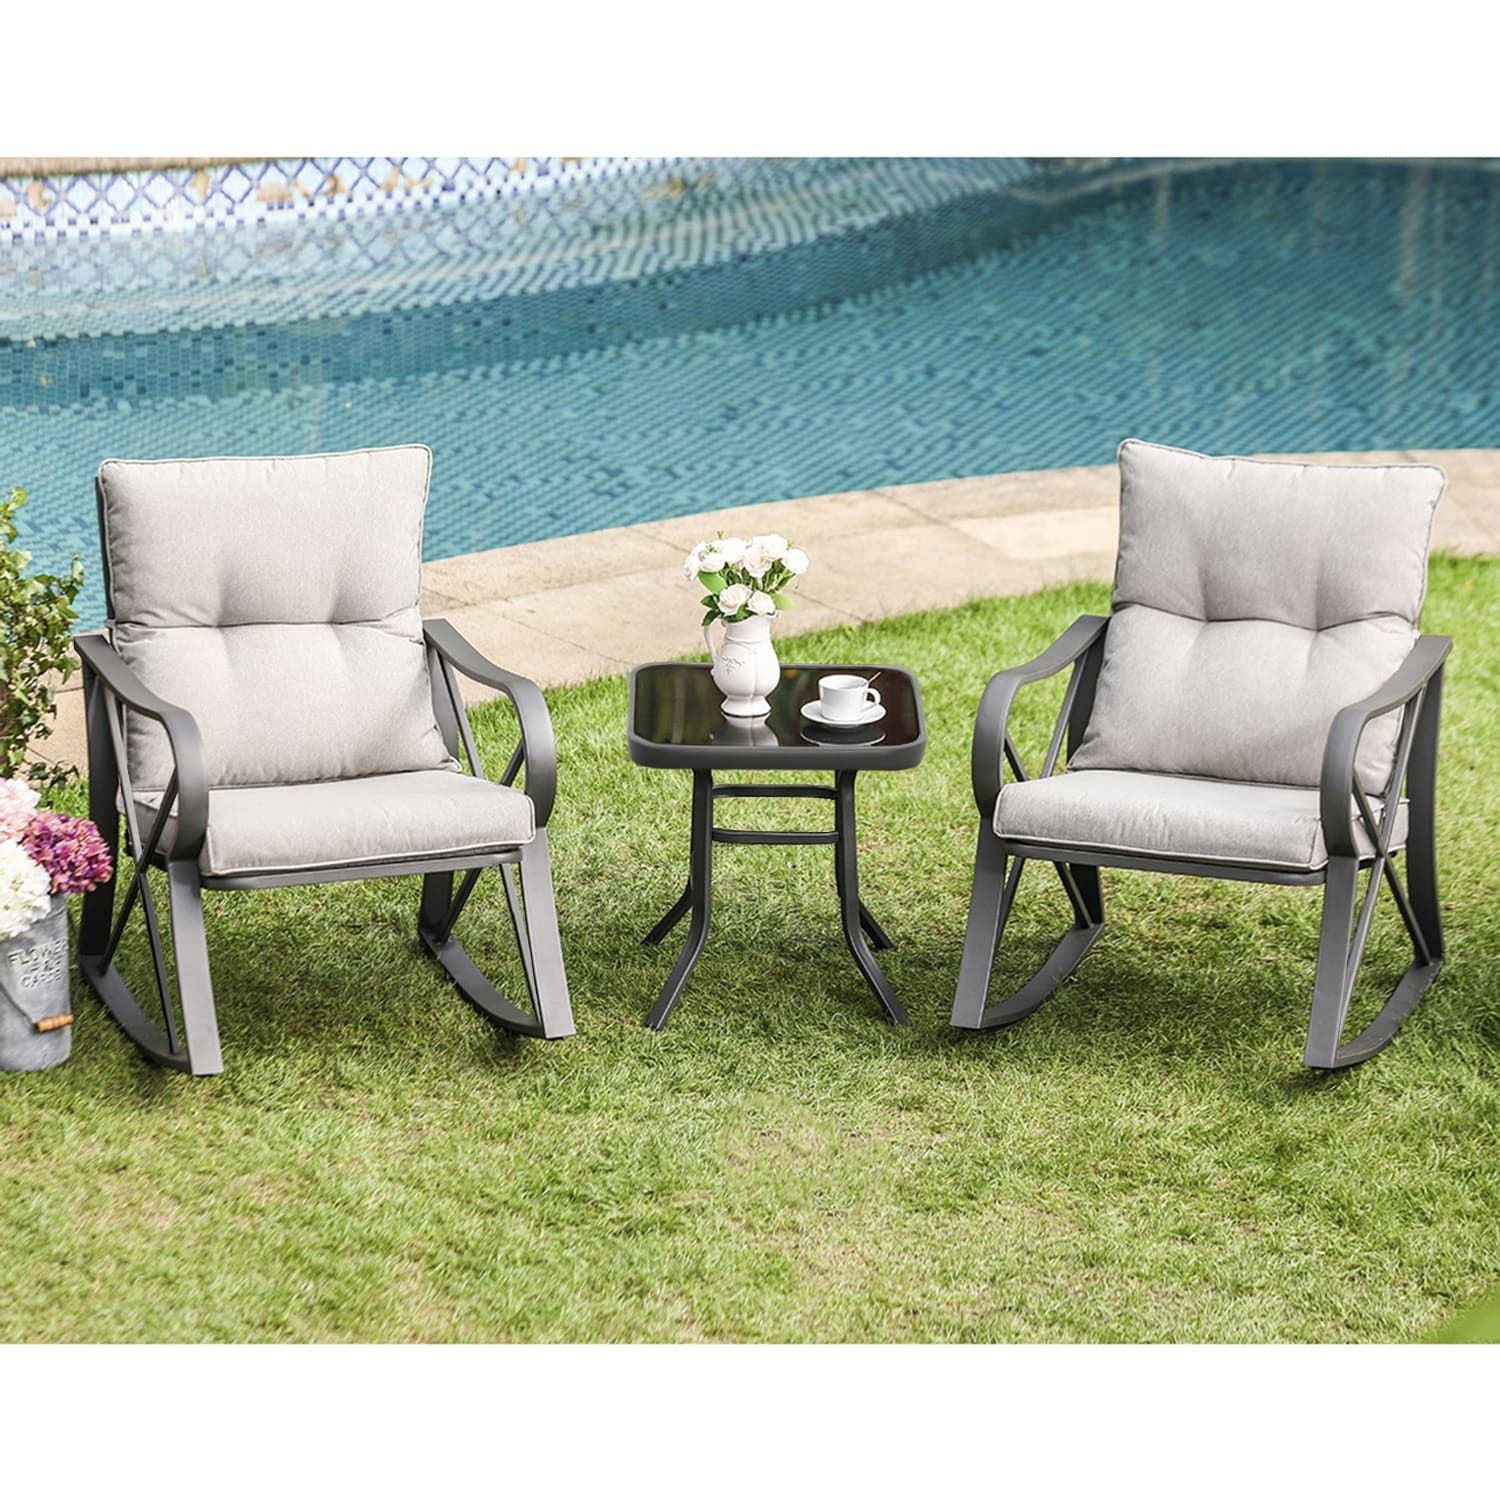 Cosiest 3 Piece Outdoor Rocking Chair Chat Set With Side Table – On Sale –  Overstock – 31479293 In 3 Piece Cushion Rocking Chair Set (View 13 of 15)